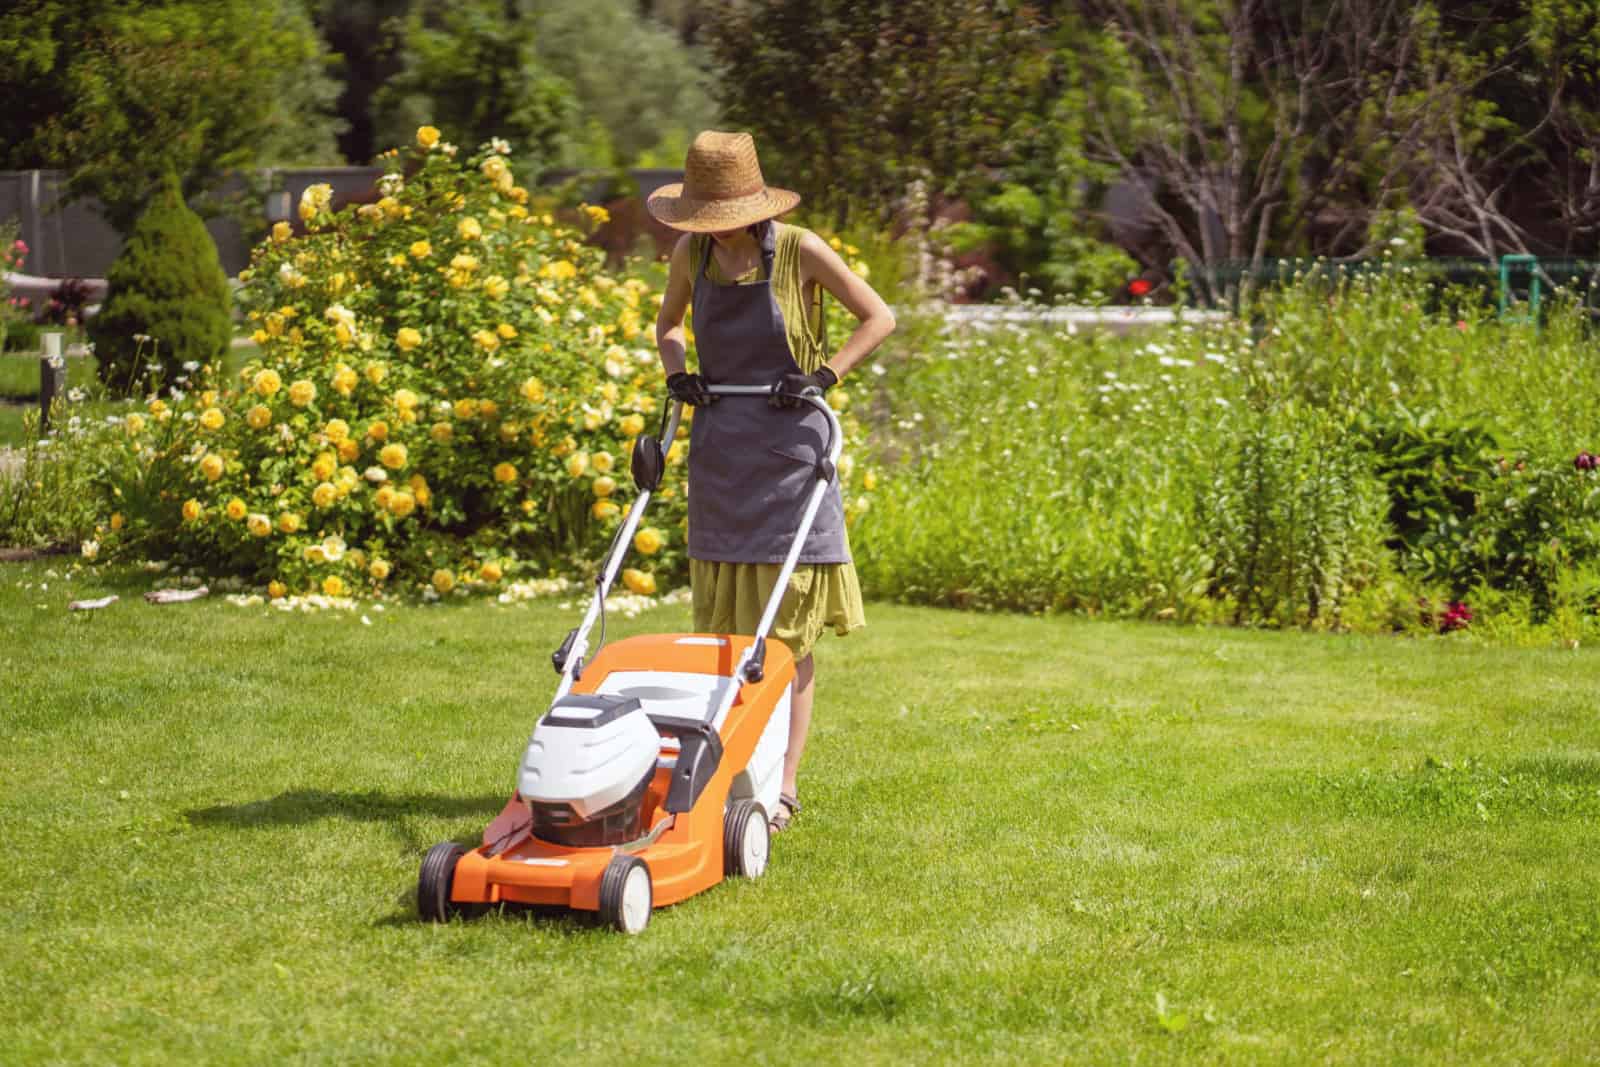 A young girl in a straw hat is mowing a lawn